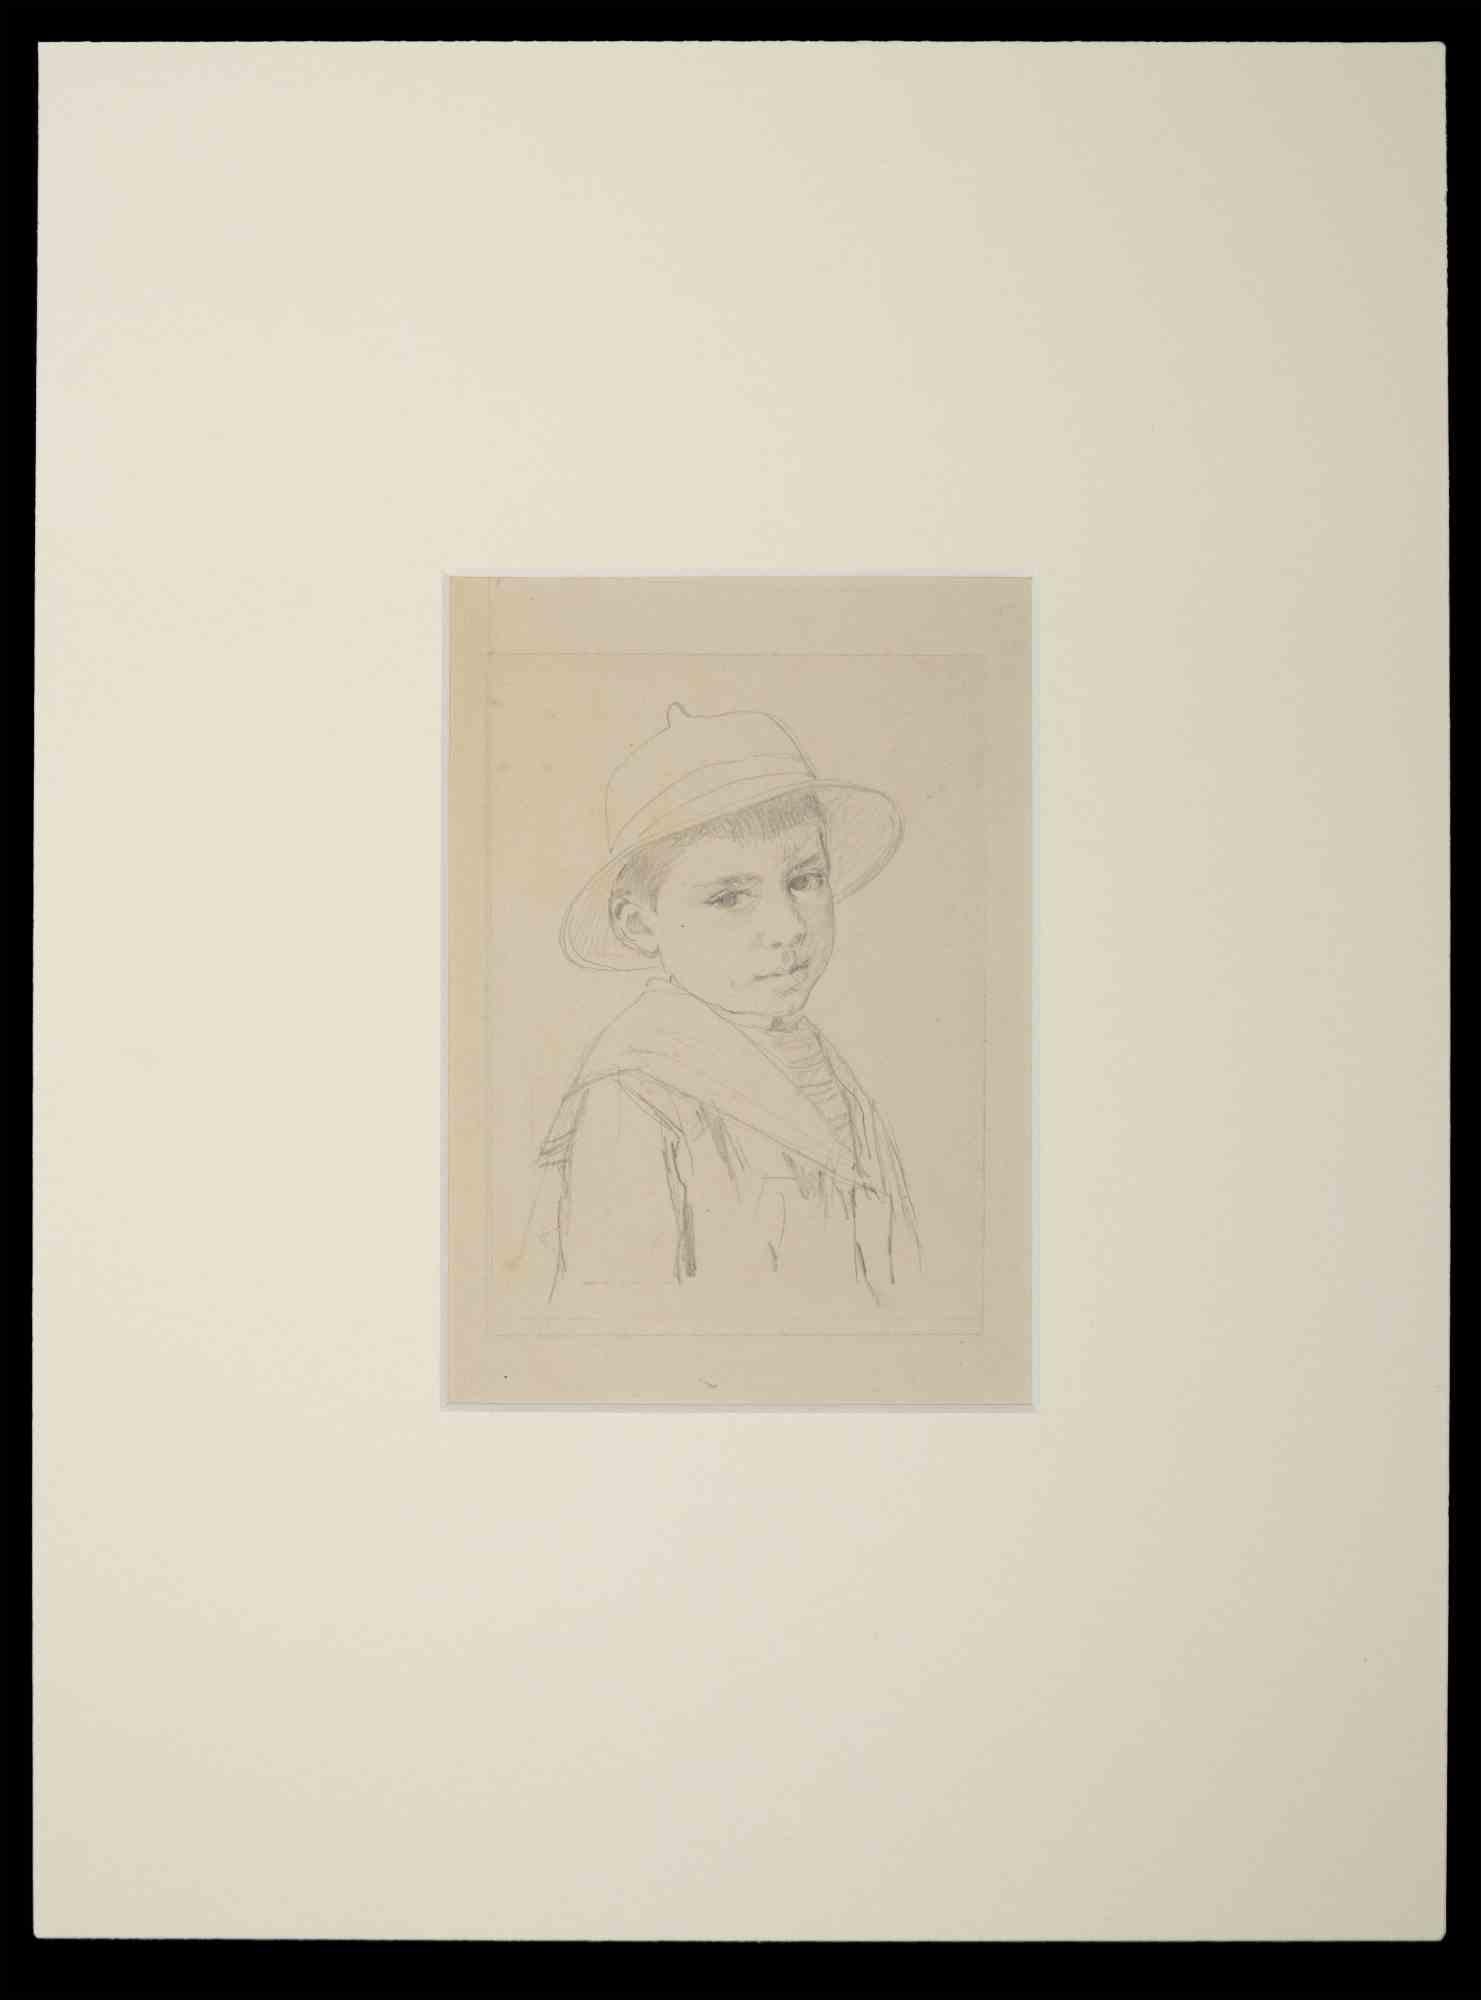 Portrait of Young Boy - Original Drawing by L.E. Adan - early 20th Century